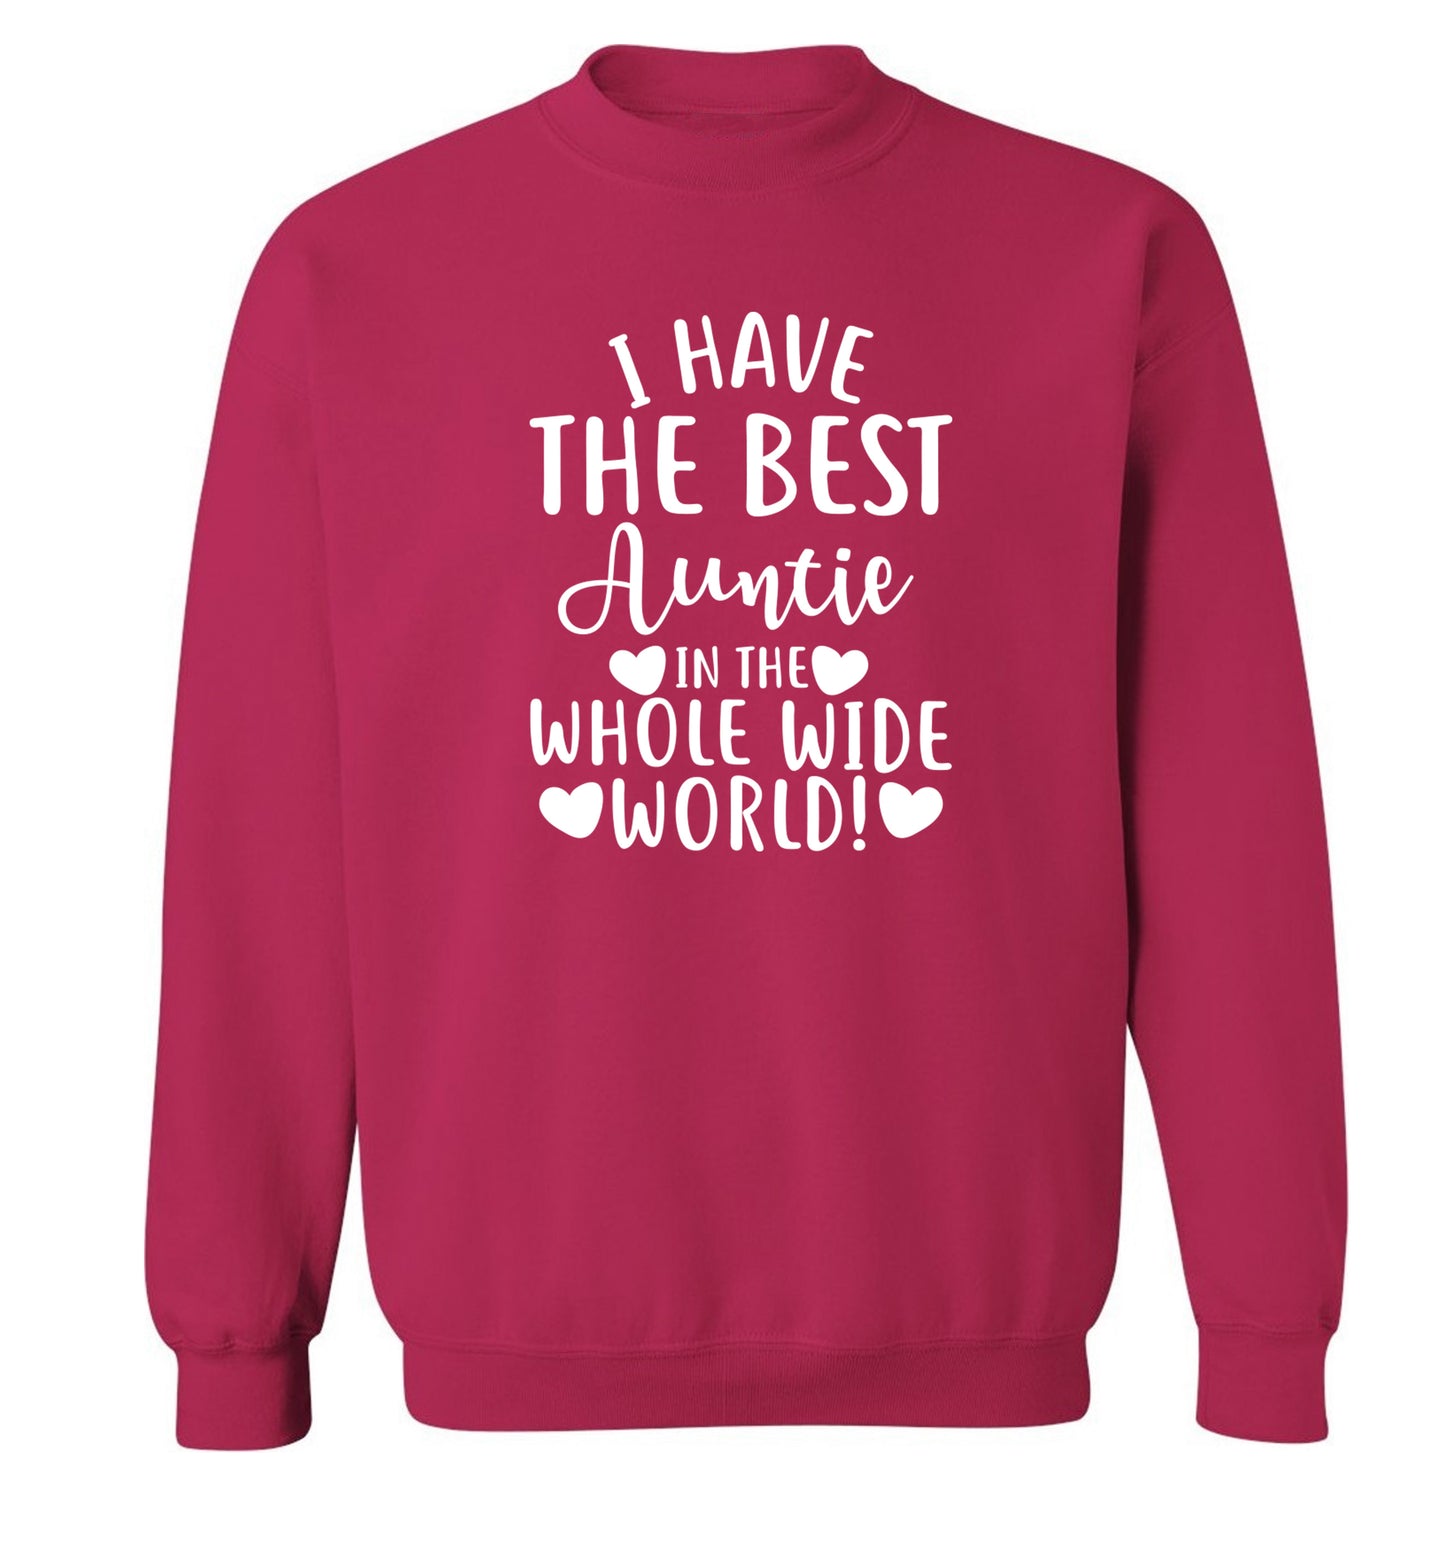 I have the best auntie in the whole wide world! Adult's unisex pink Sweater 2XL